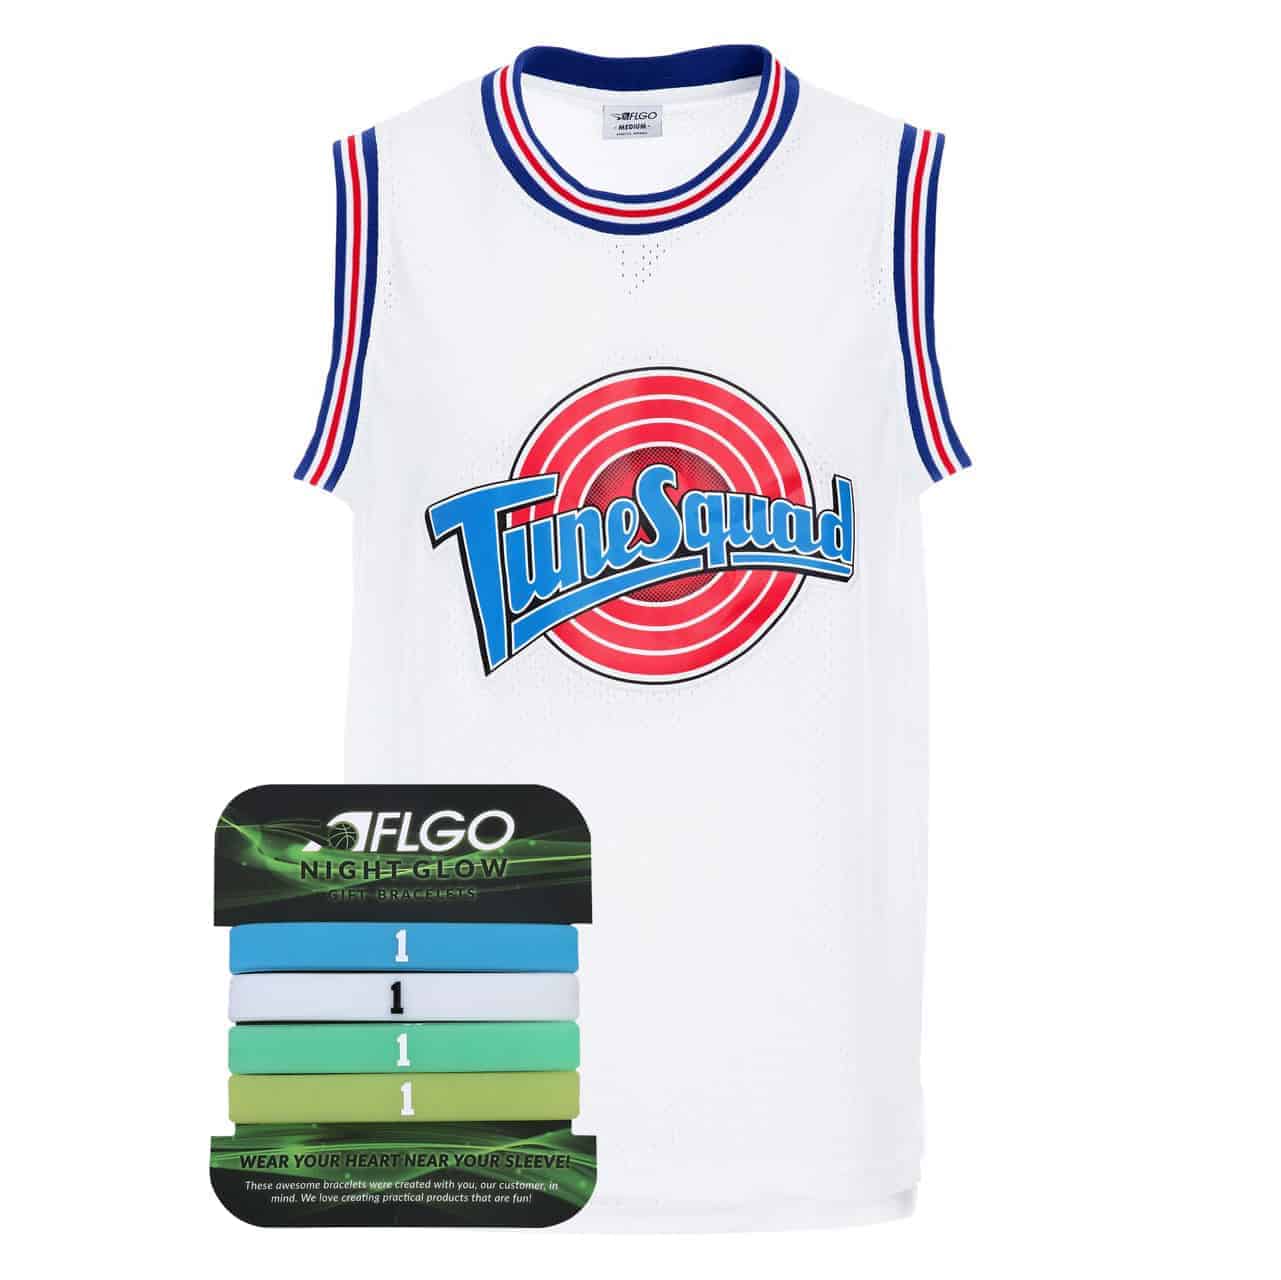 space jam baby jersey